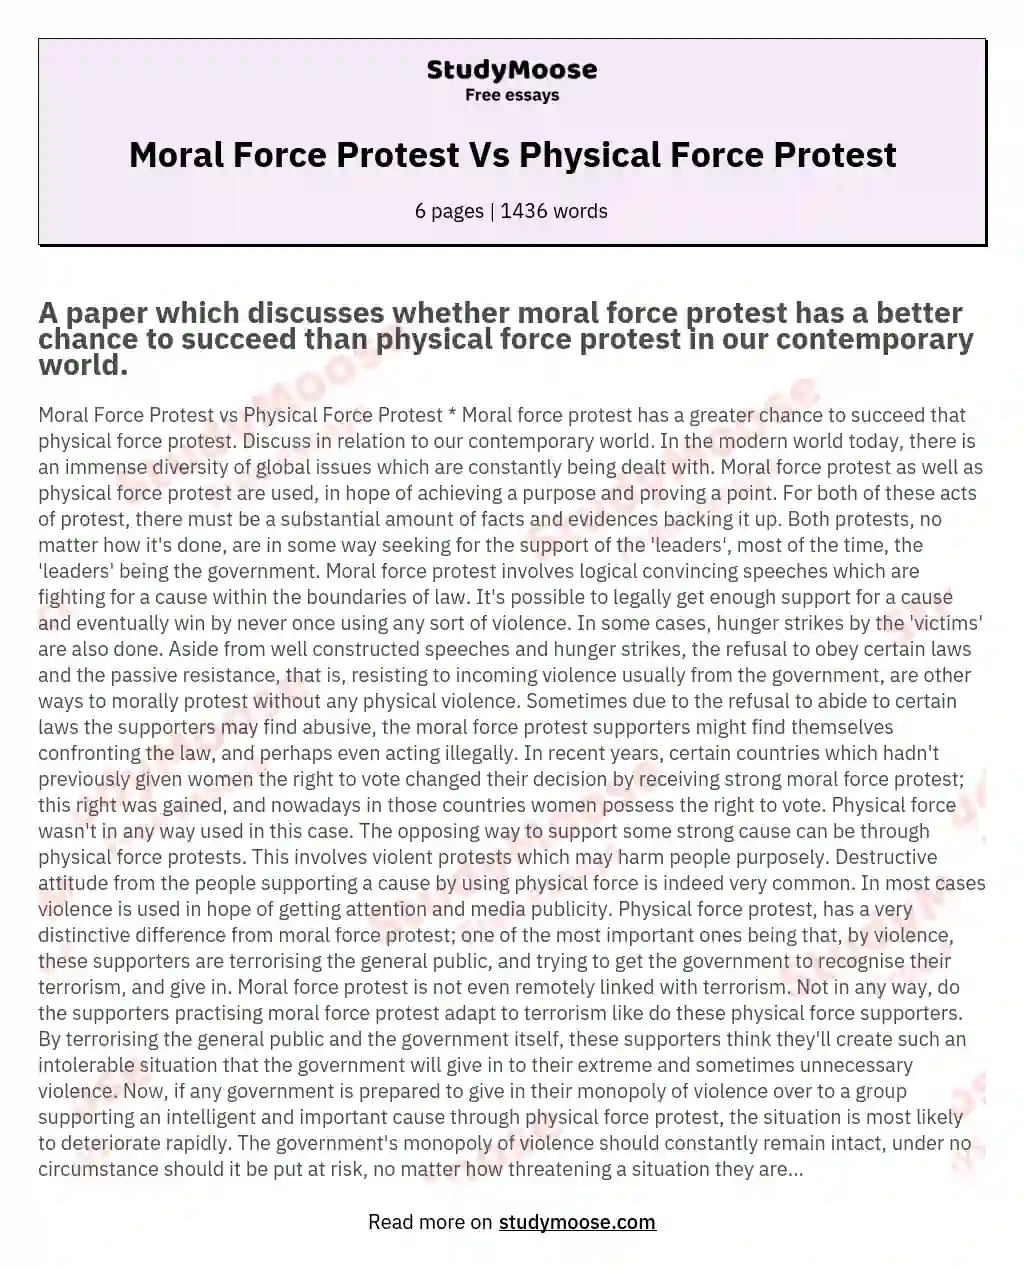 Moral Force Protest Vs Physical Force Protest essay